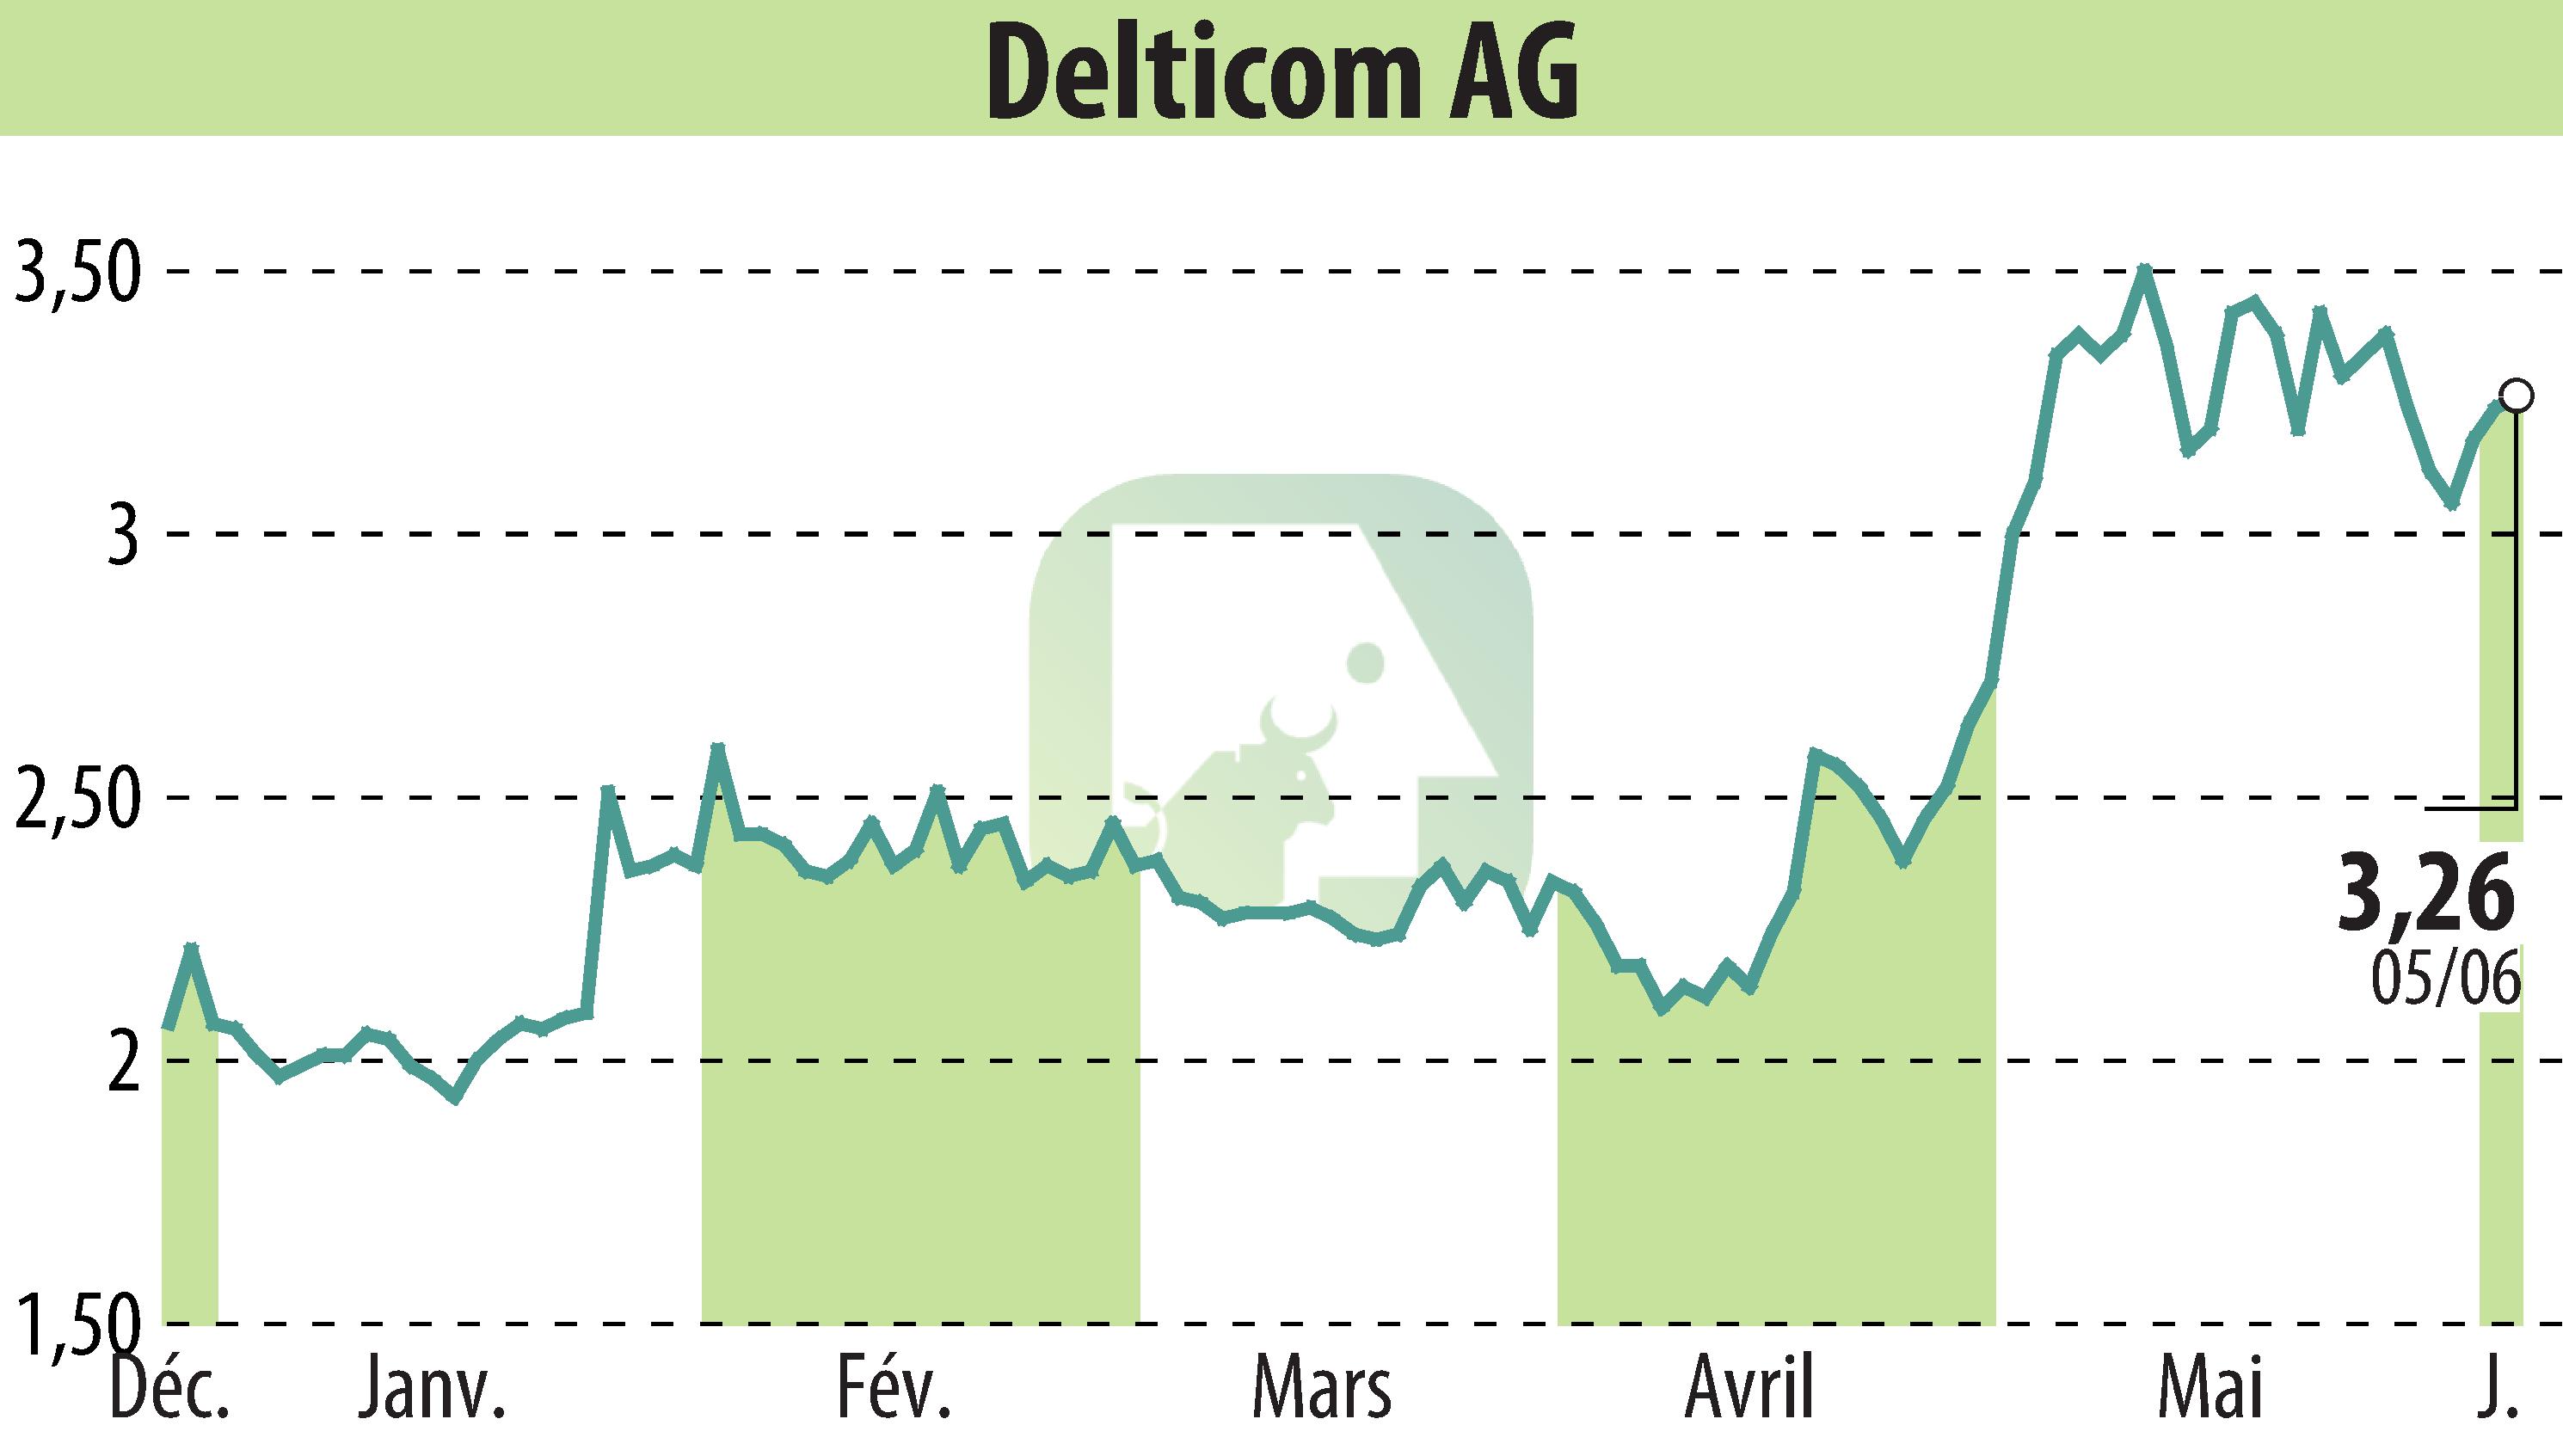 Stock price chart of Delticom AG (EBR:DEX) showing fluctuations.